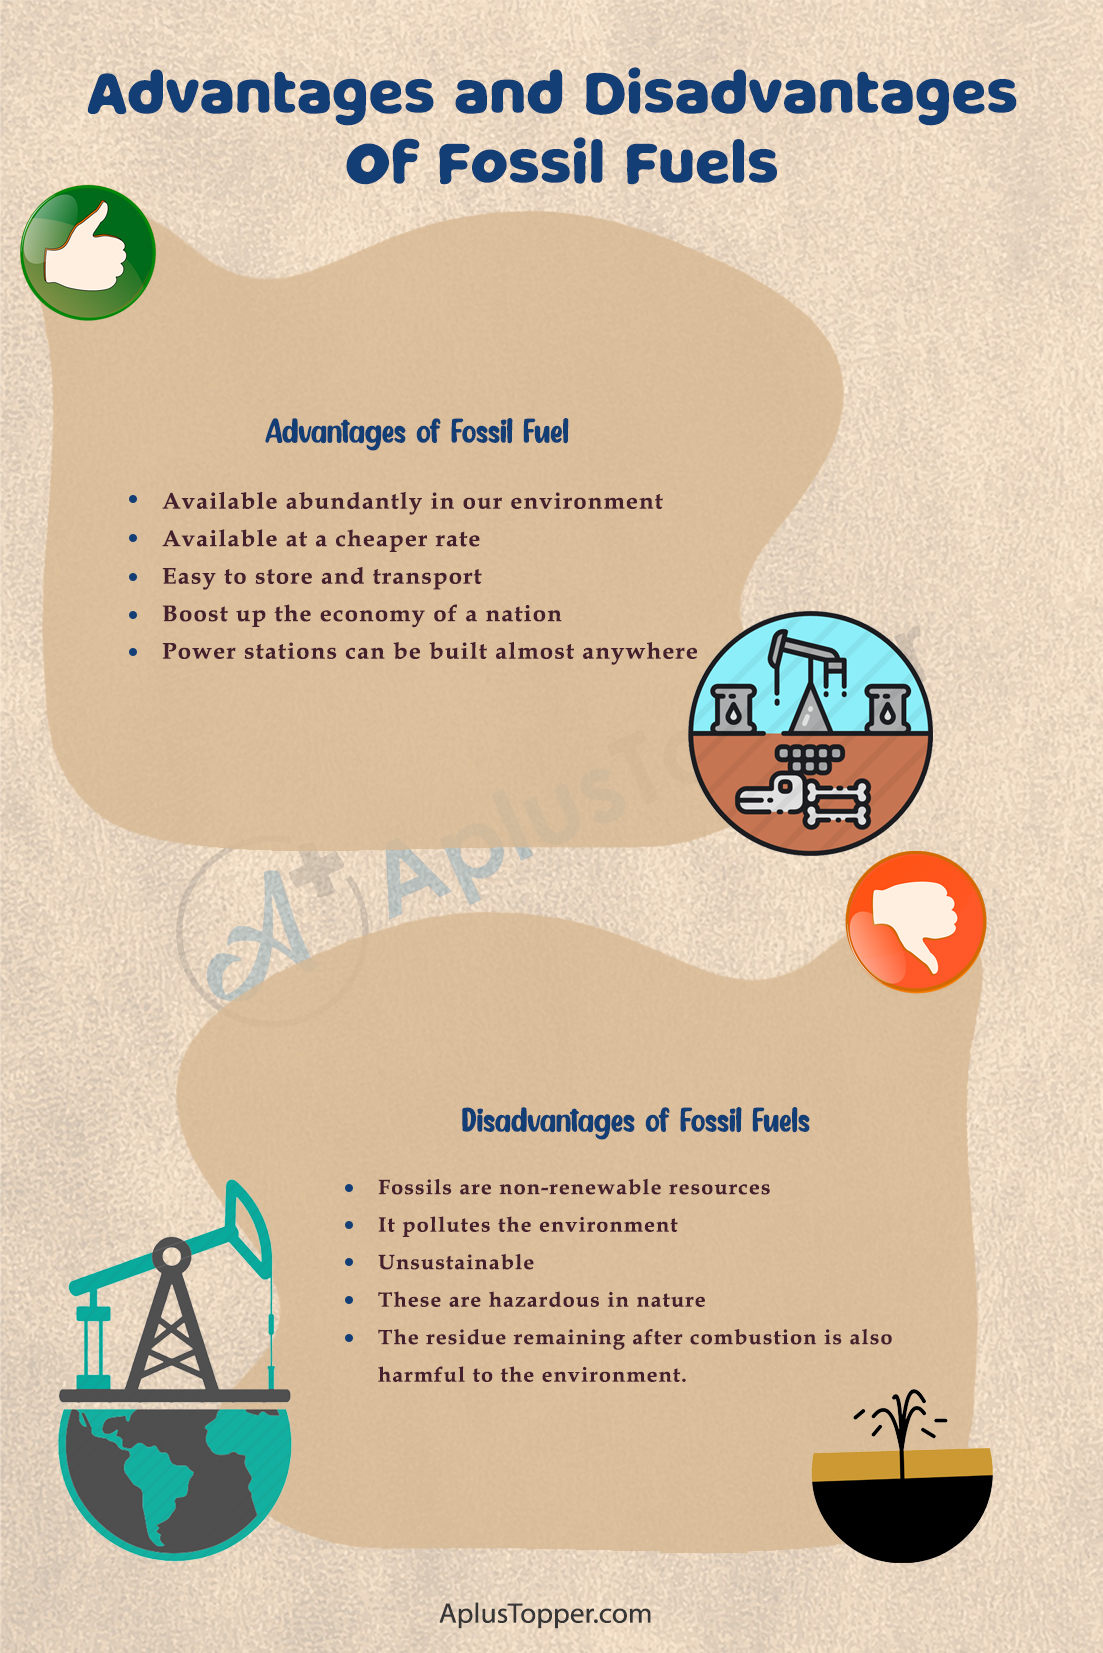 Advantages and Disadvantages of Fossil Fuel